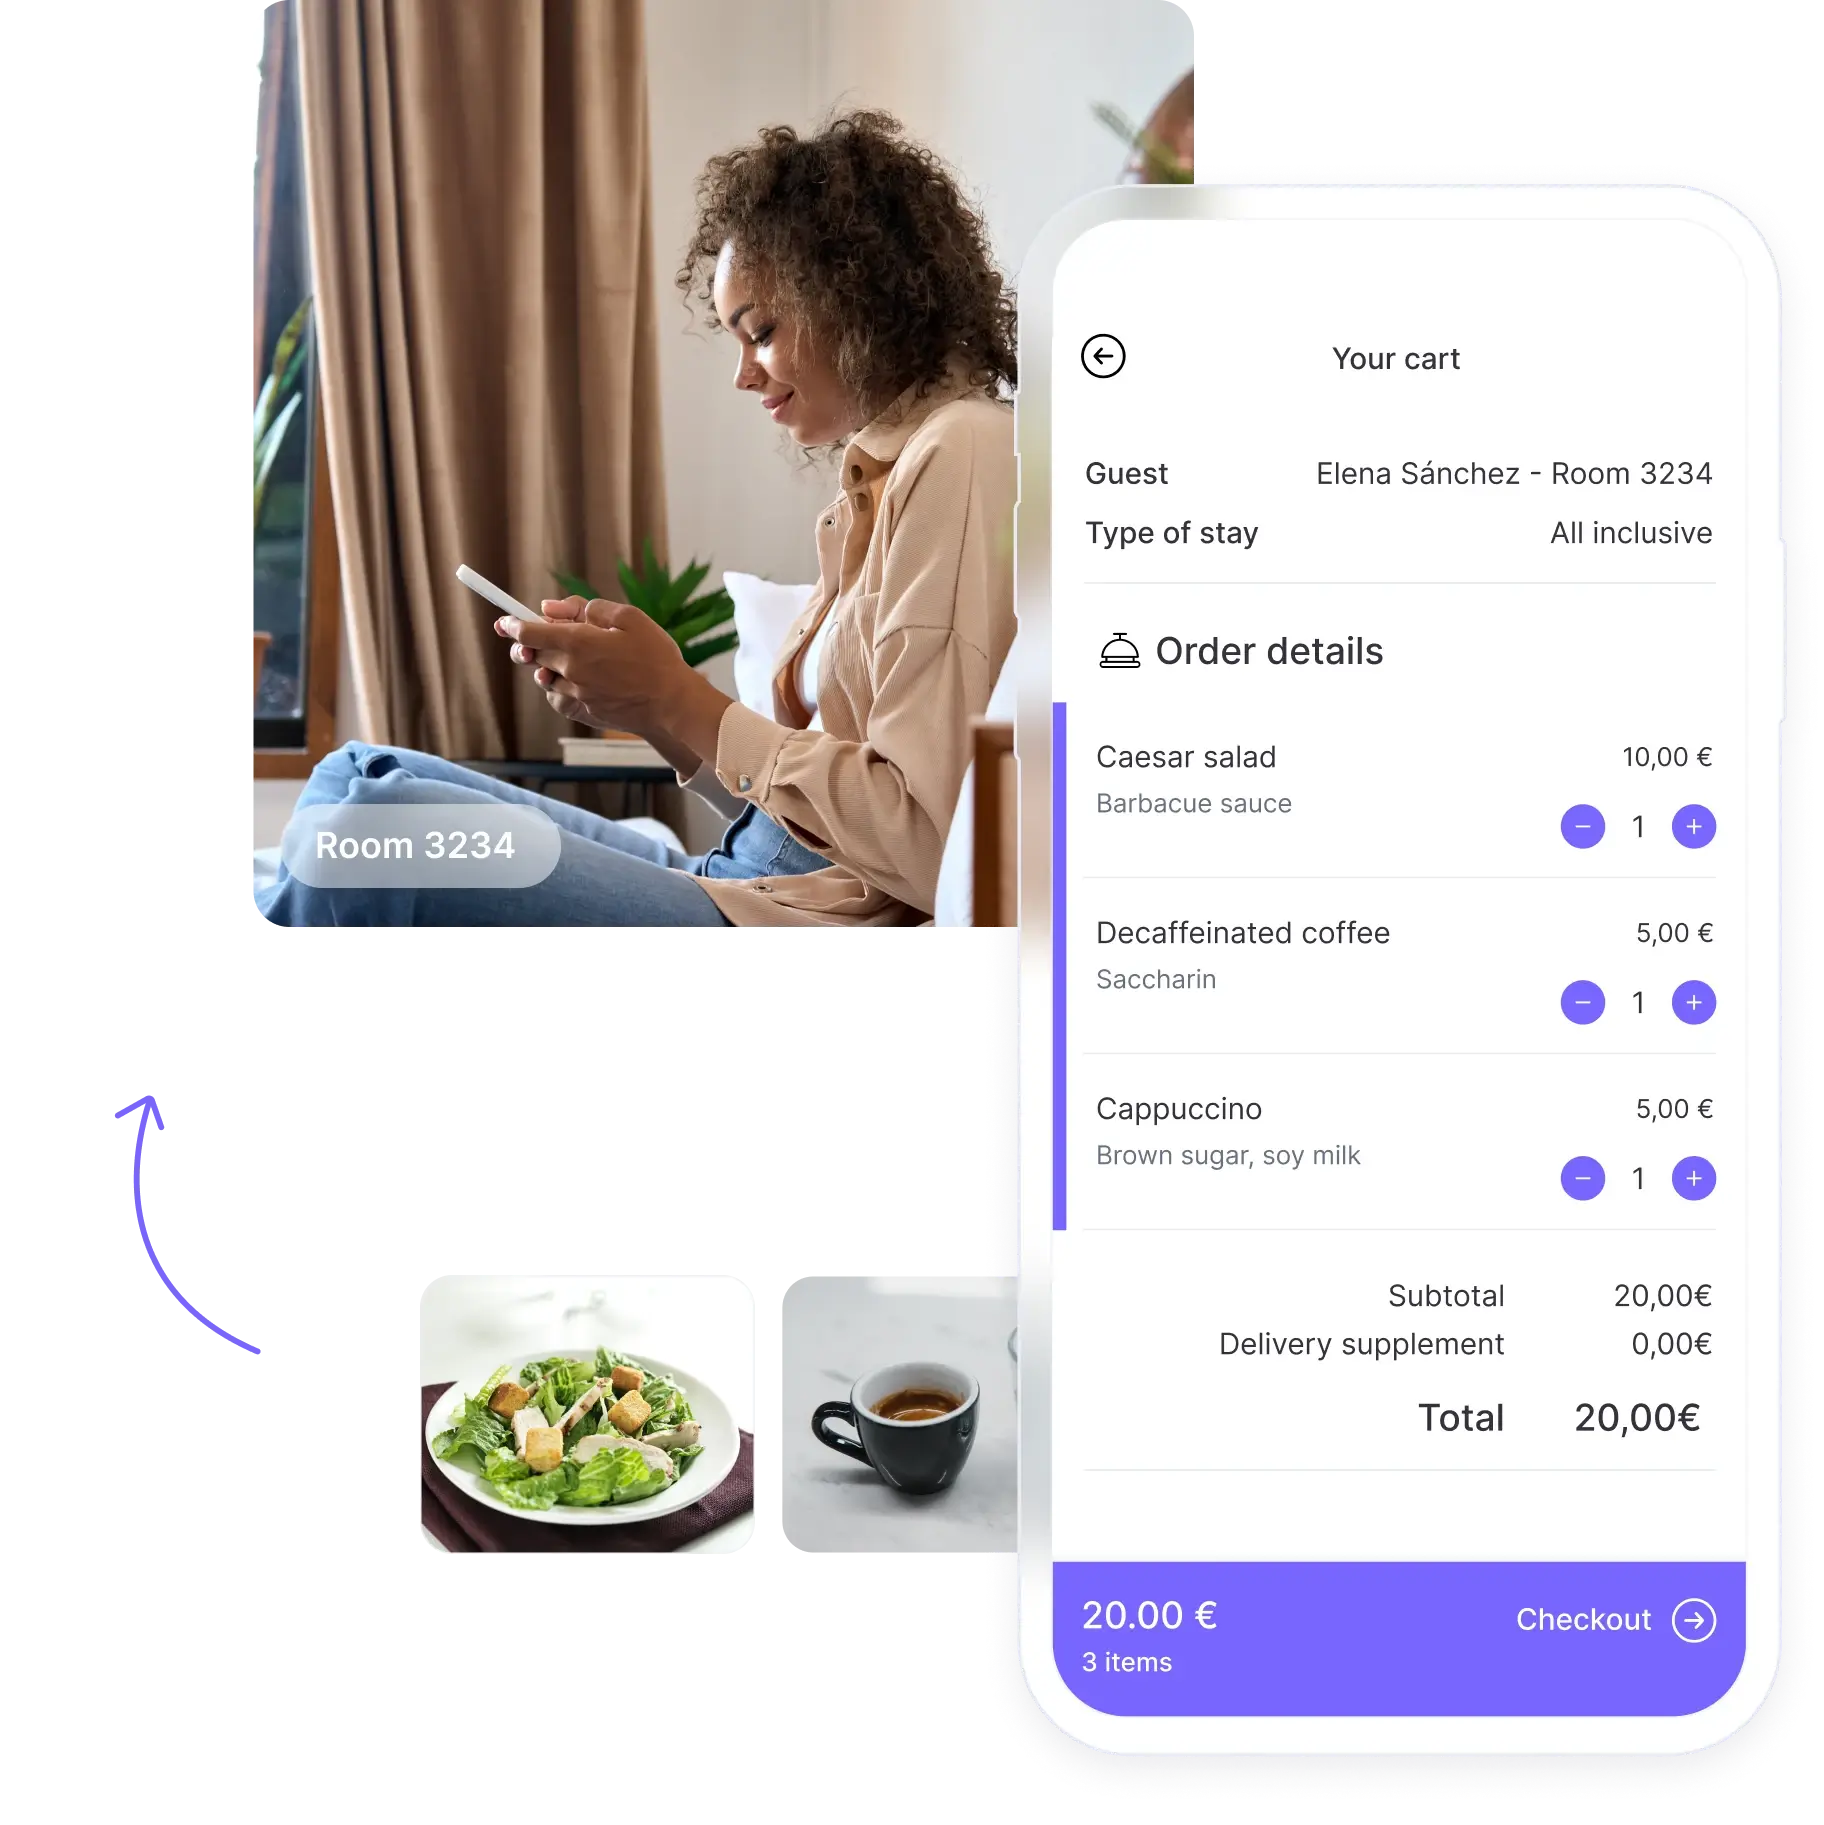 Hotel guests ordering with the app